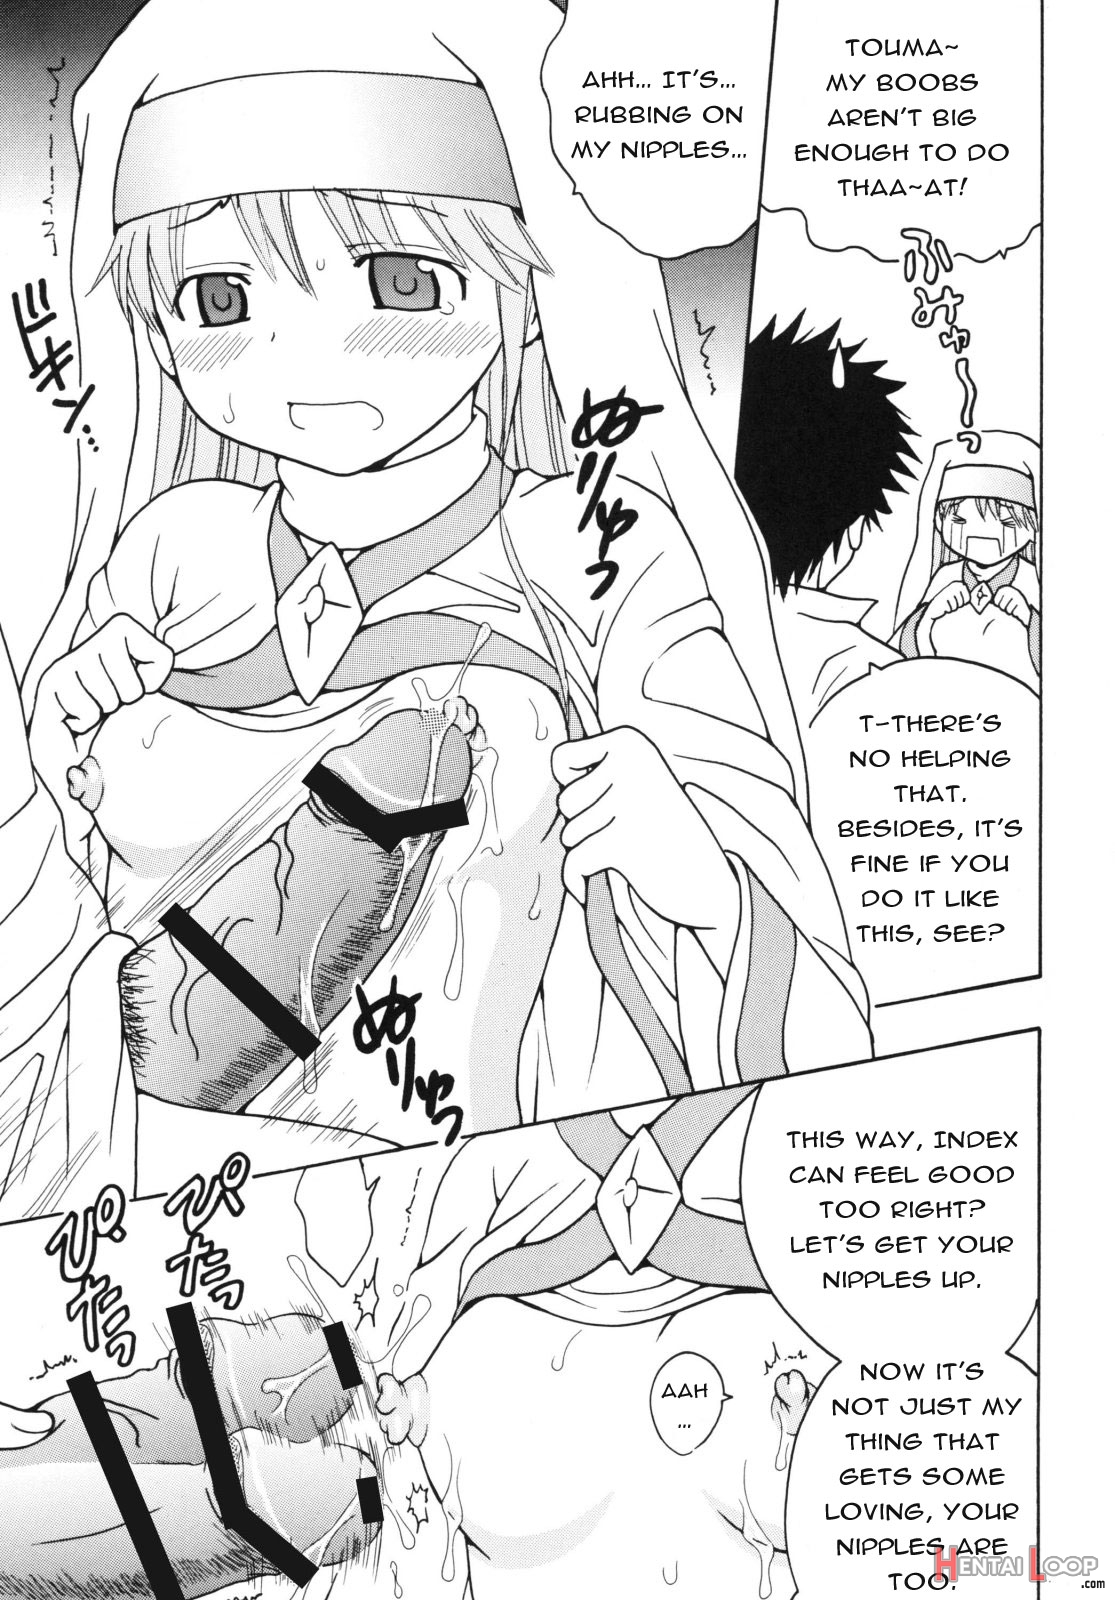 A Certain Magical Lewd Index #2 page 29